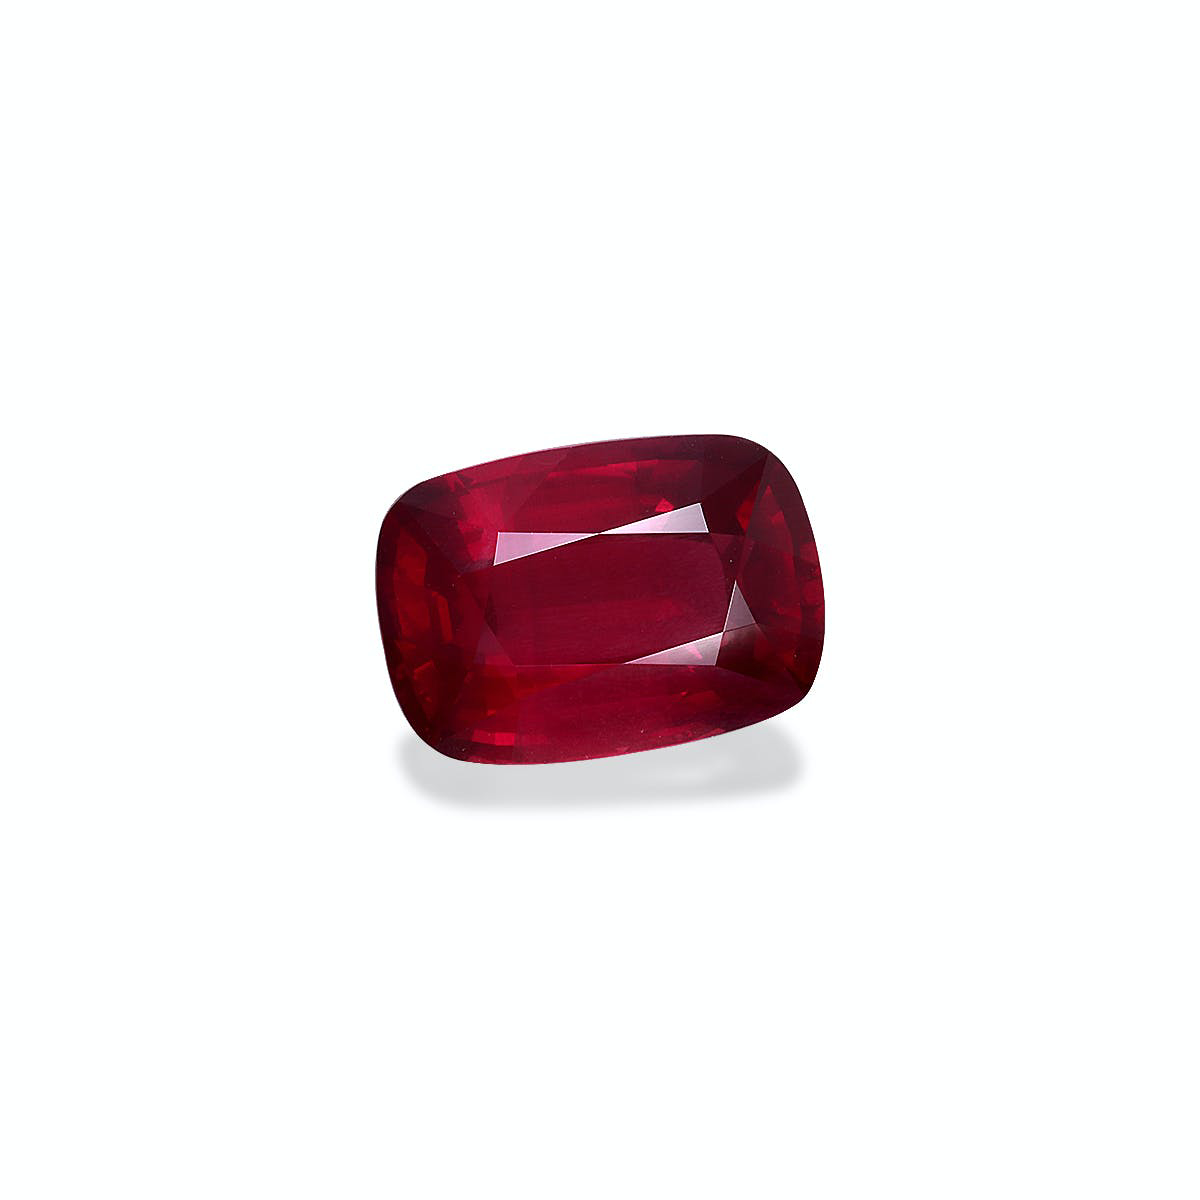 Pigeons Blood Heated Mozambique Ruby 7.06ct (AS0004)